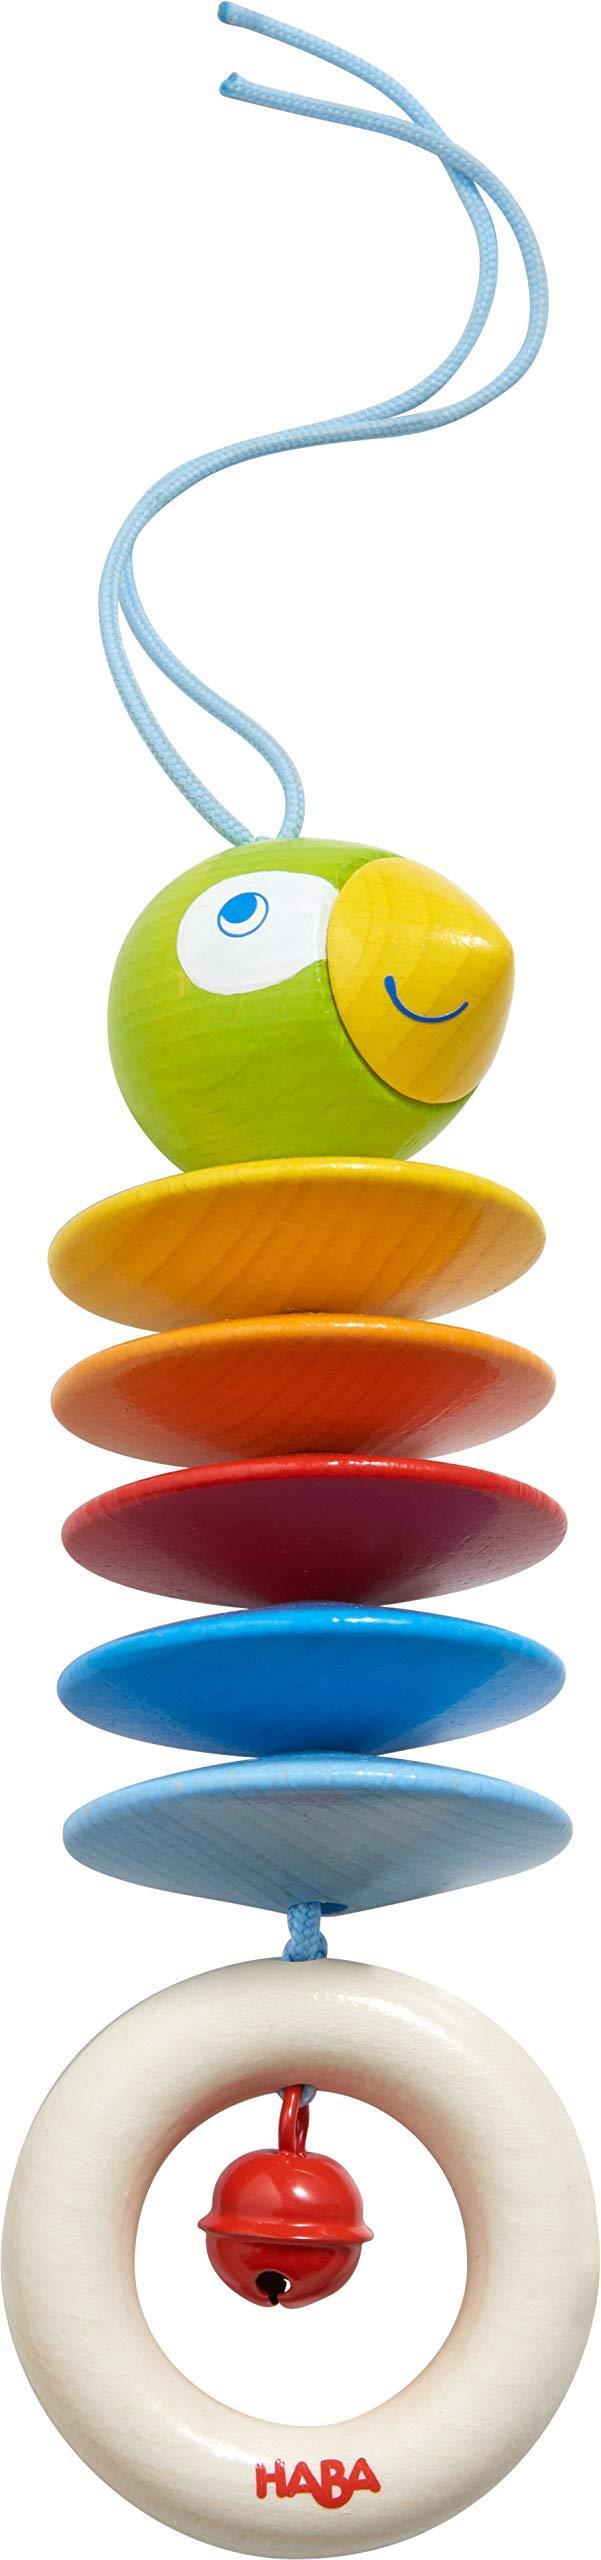 Wooden Dangling Parrot - Baby Toy - Kitty Hawk Kites Online Store